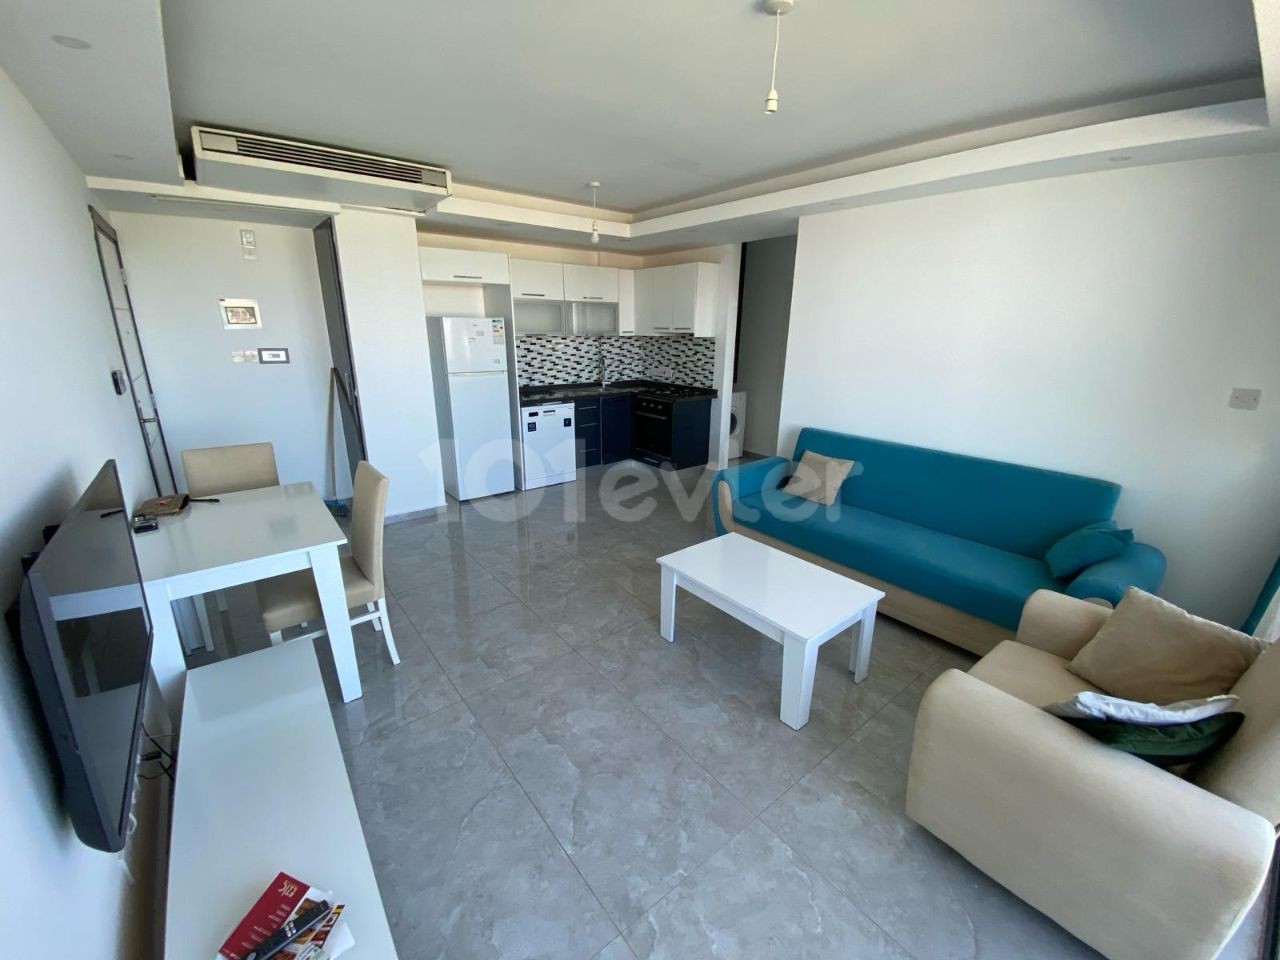 1+1 Apartment For Rent With Sea View From The Living Room and Bedroom - Lapta Kyrenia